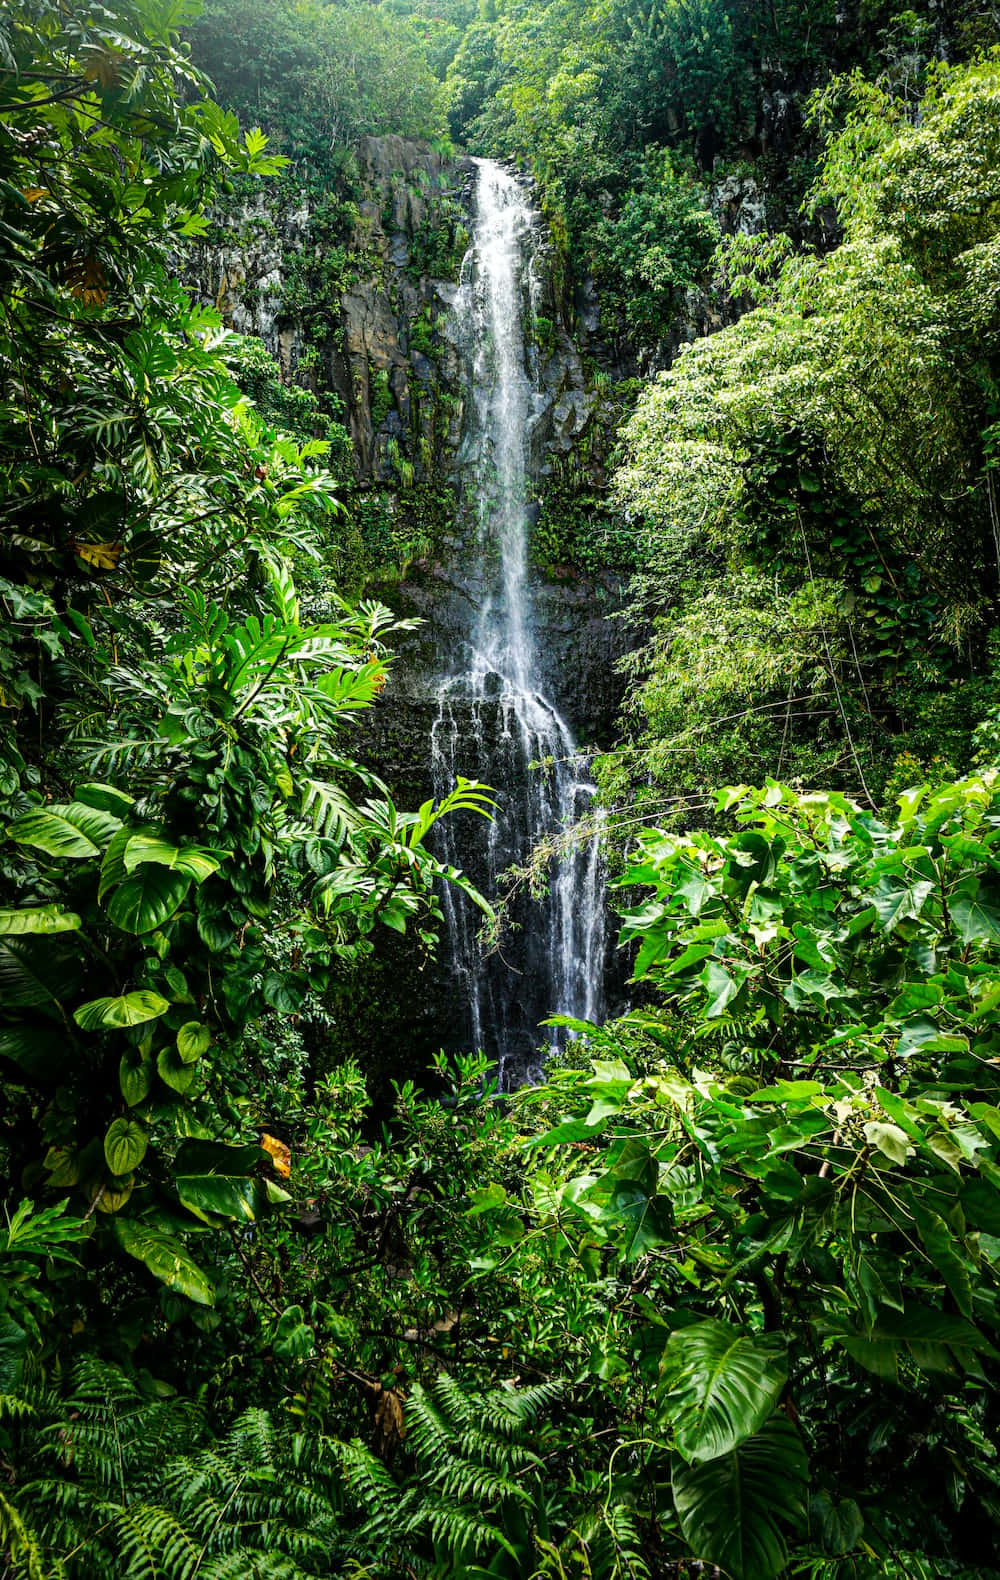 A Waterfall Surrounded By Lush Green Vegetation